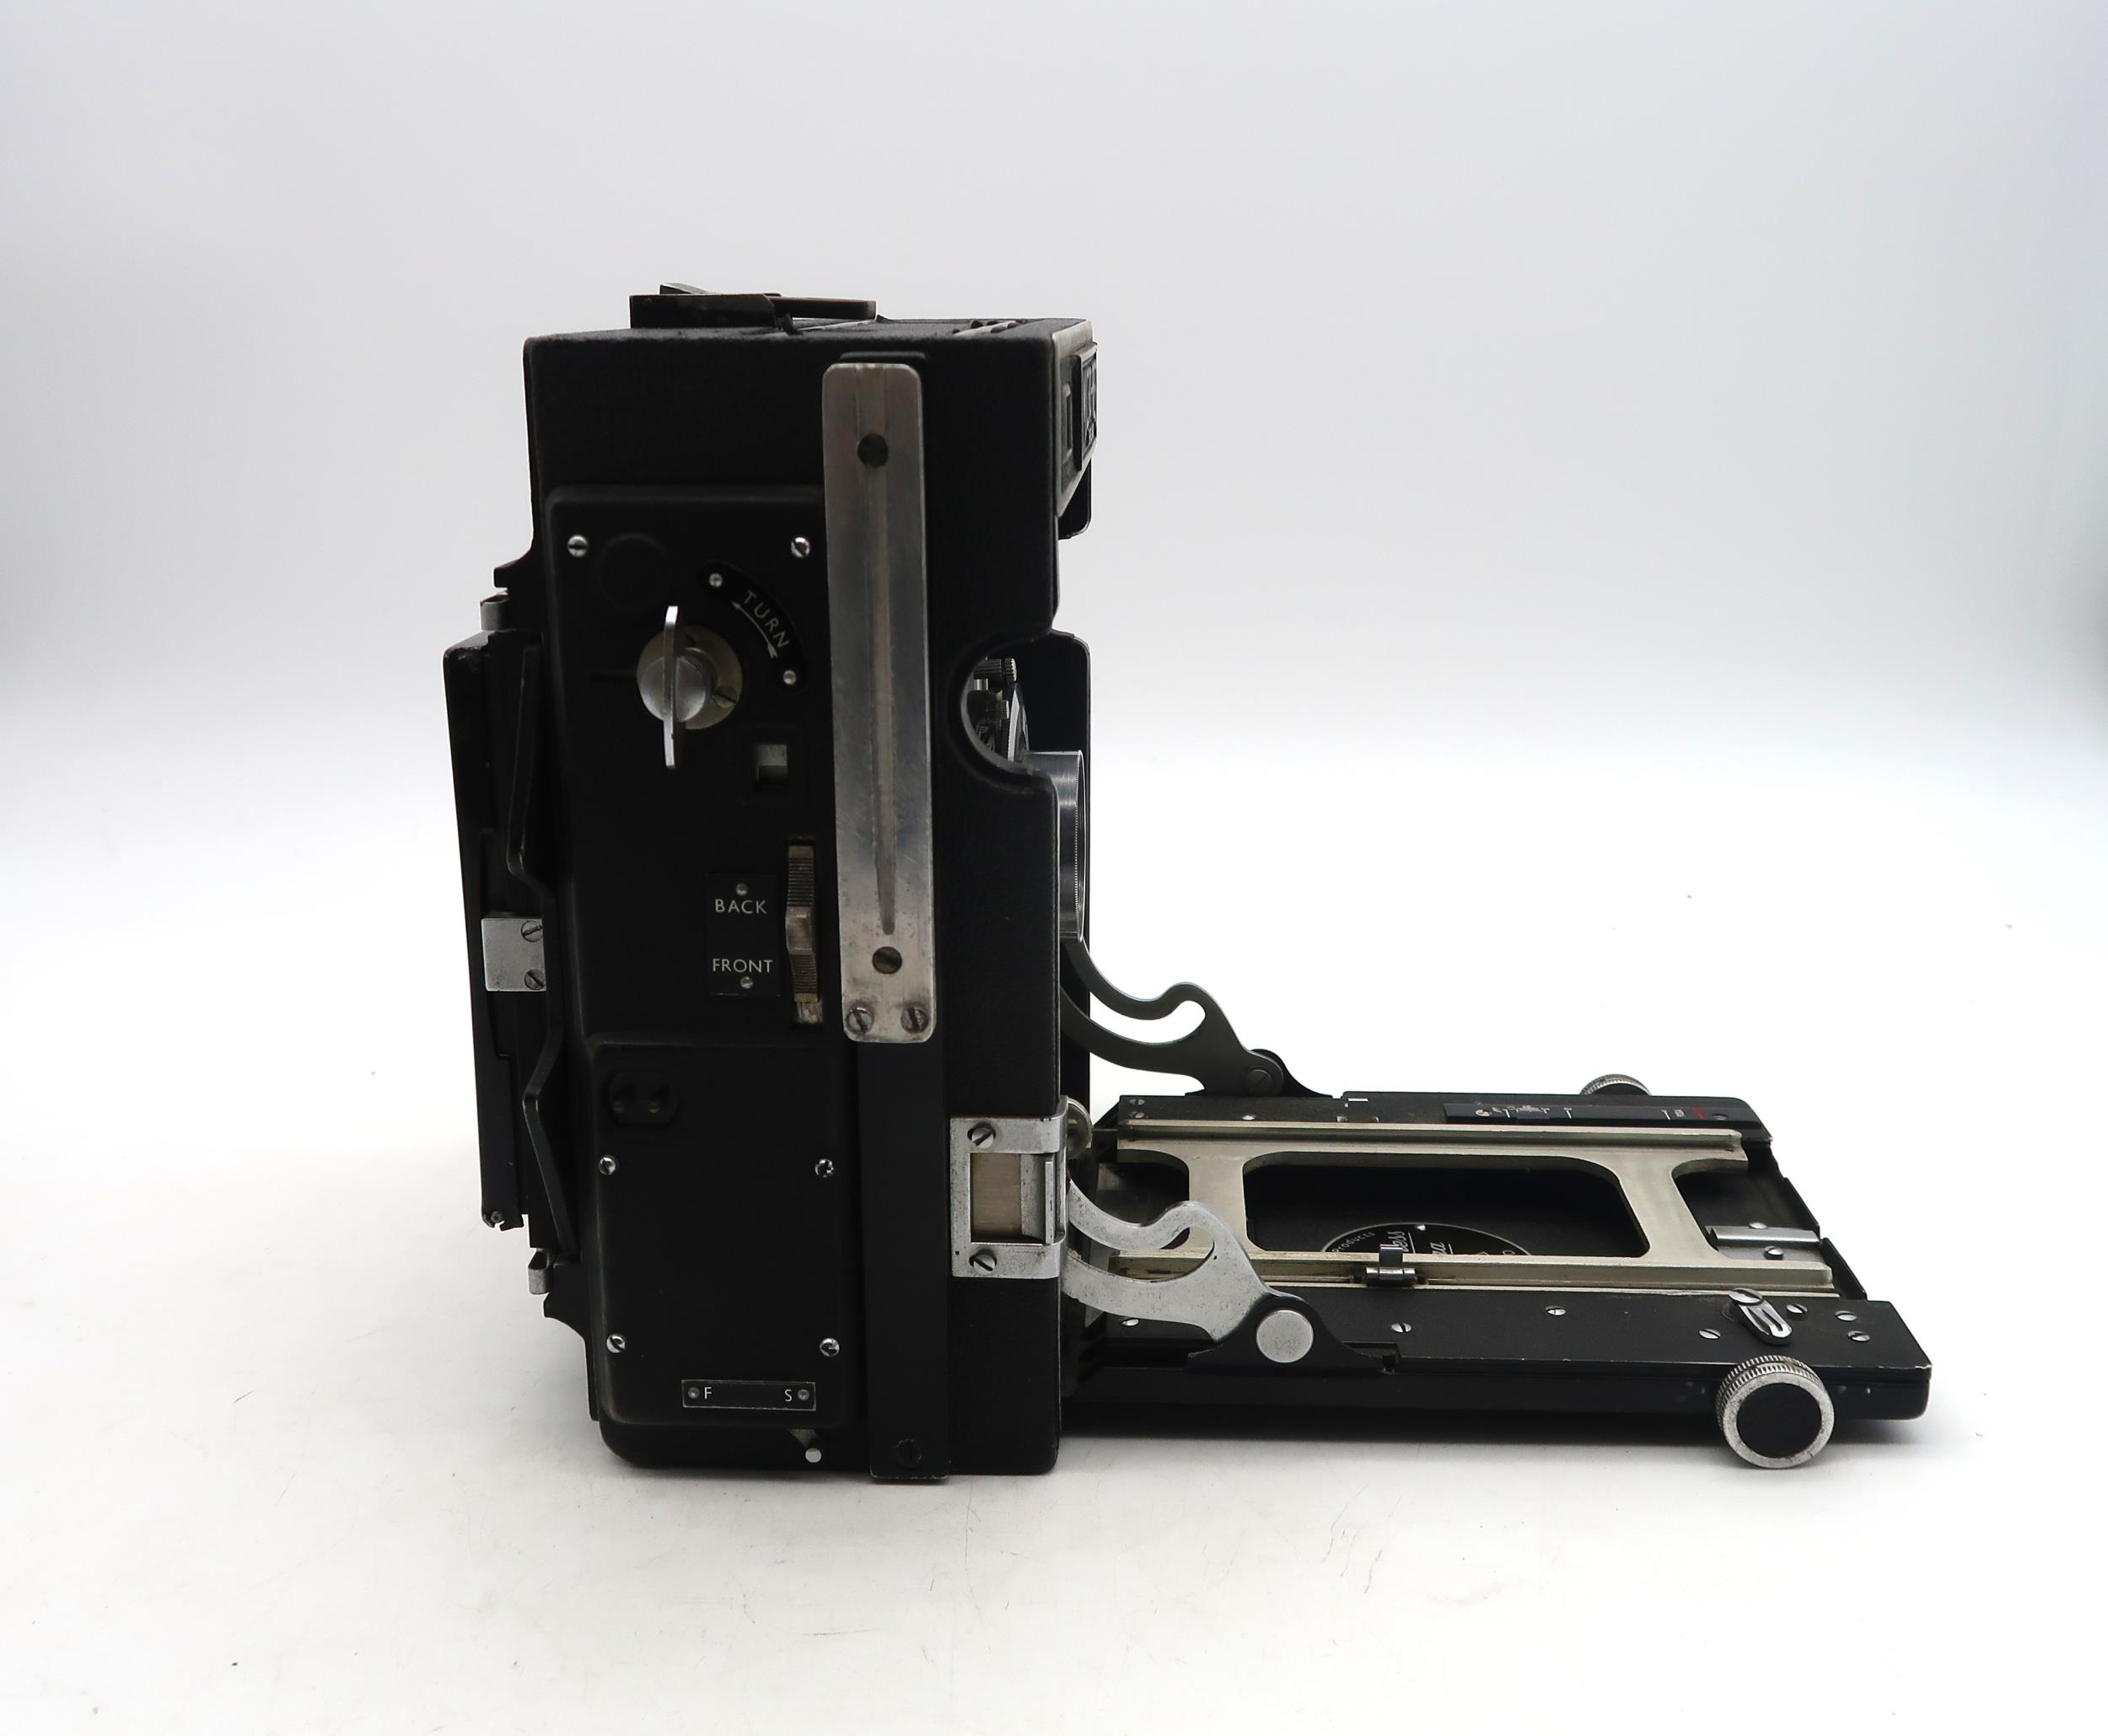 An MPP Micro-Press 5x4 large format camera, fitted with a Schneider Kreuznach Xenar 1:4.5/150 - Image 4 of 4